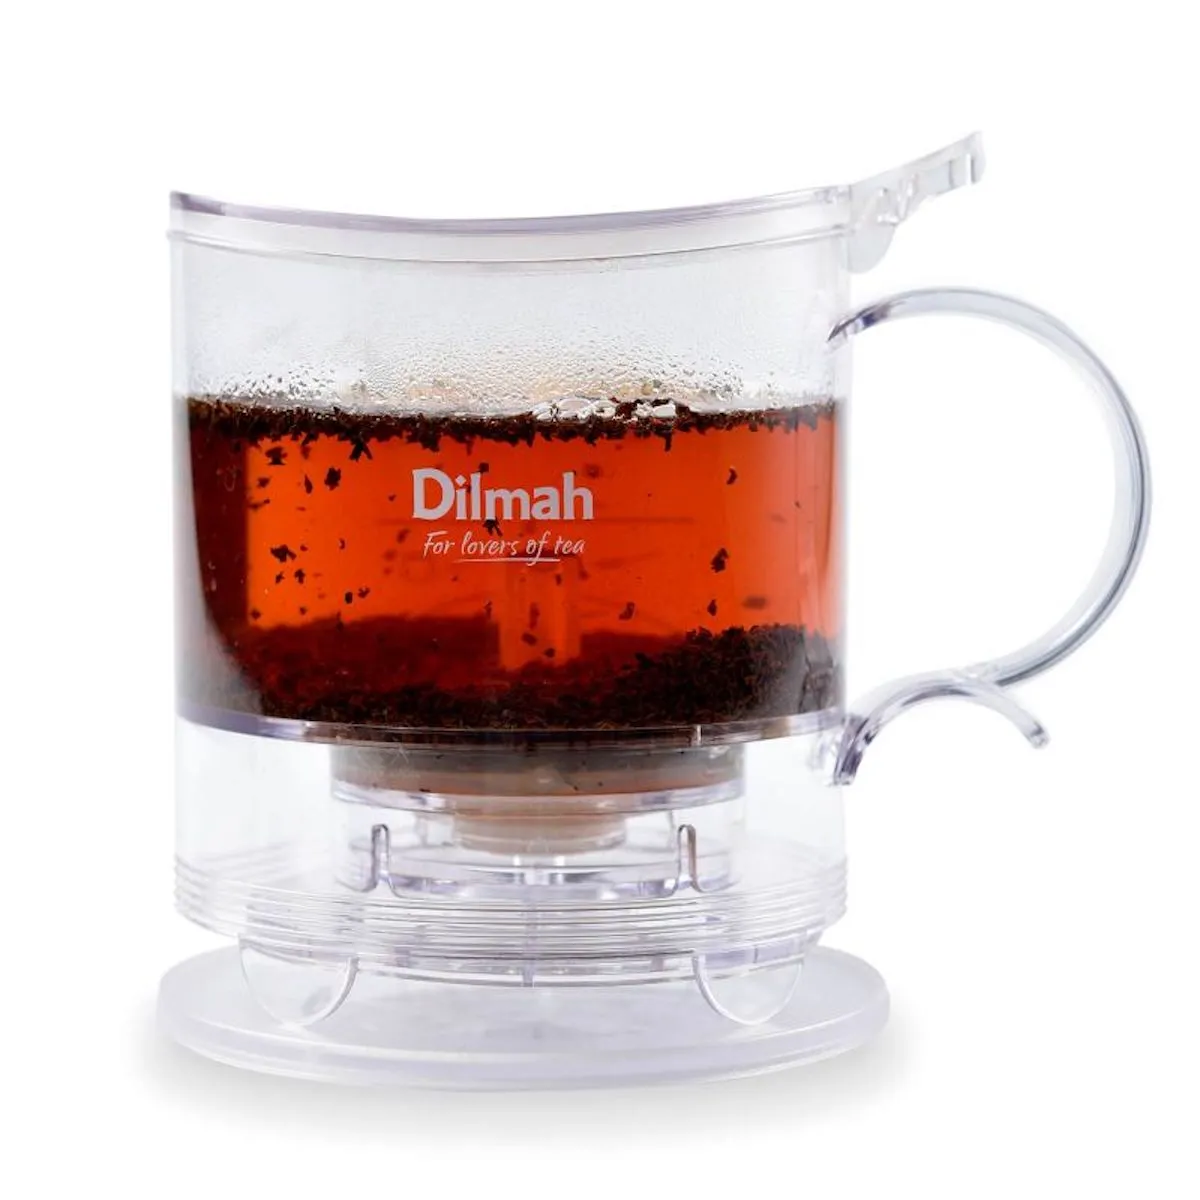 transparent perfect Cup Infuser with loose leaf black tea infusing in it.